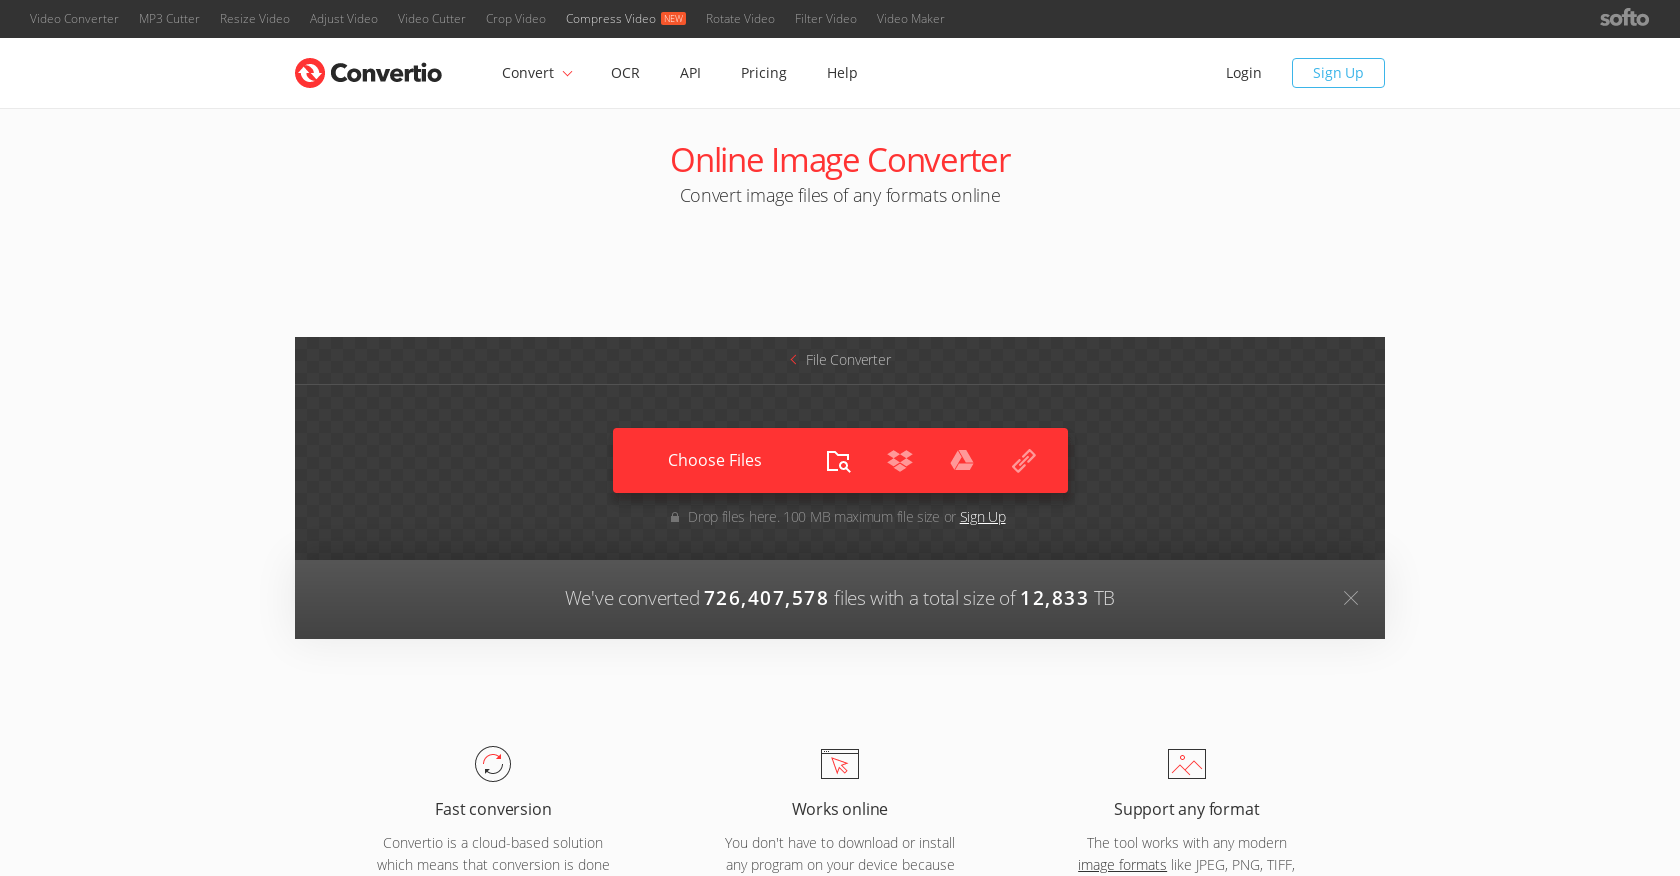 Tools to convert images - Convertio